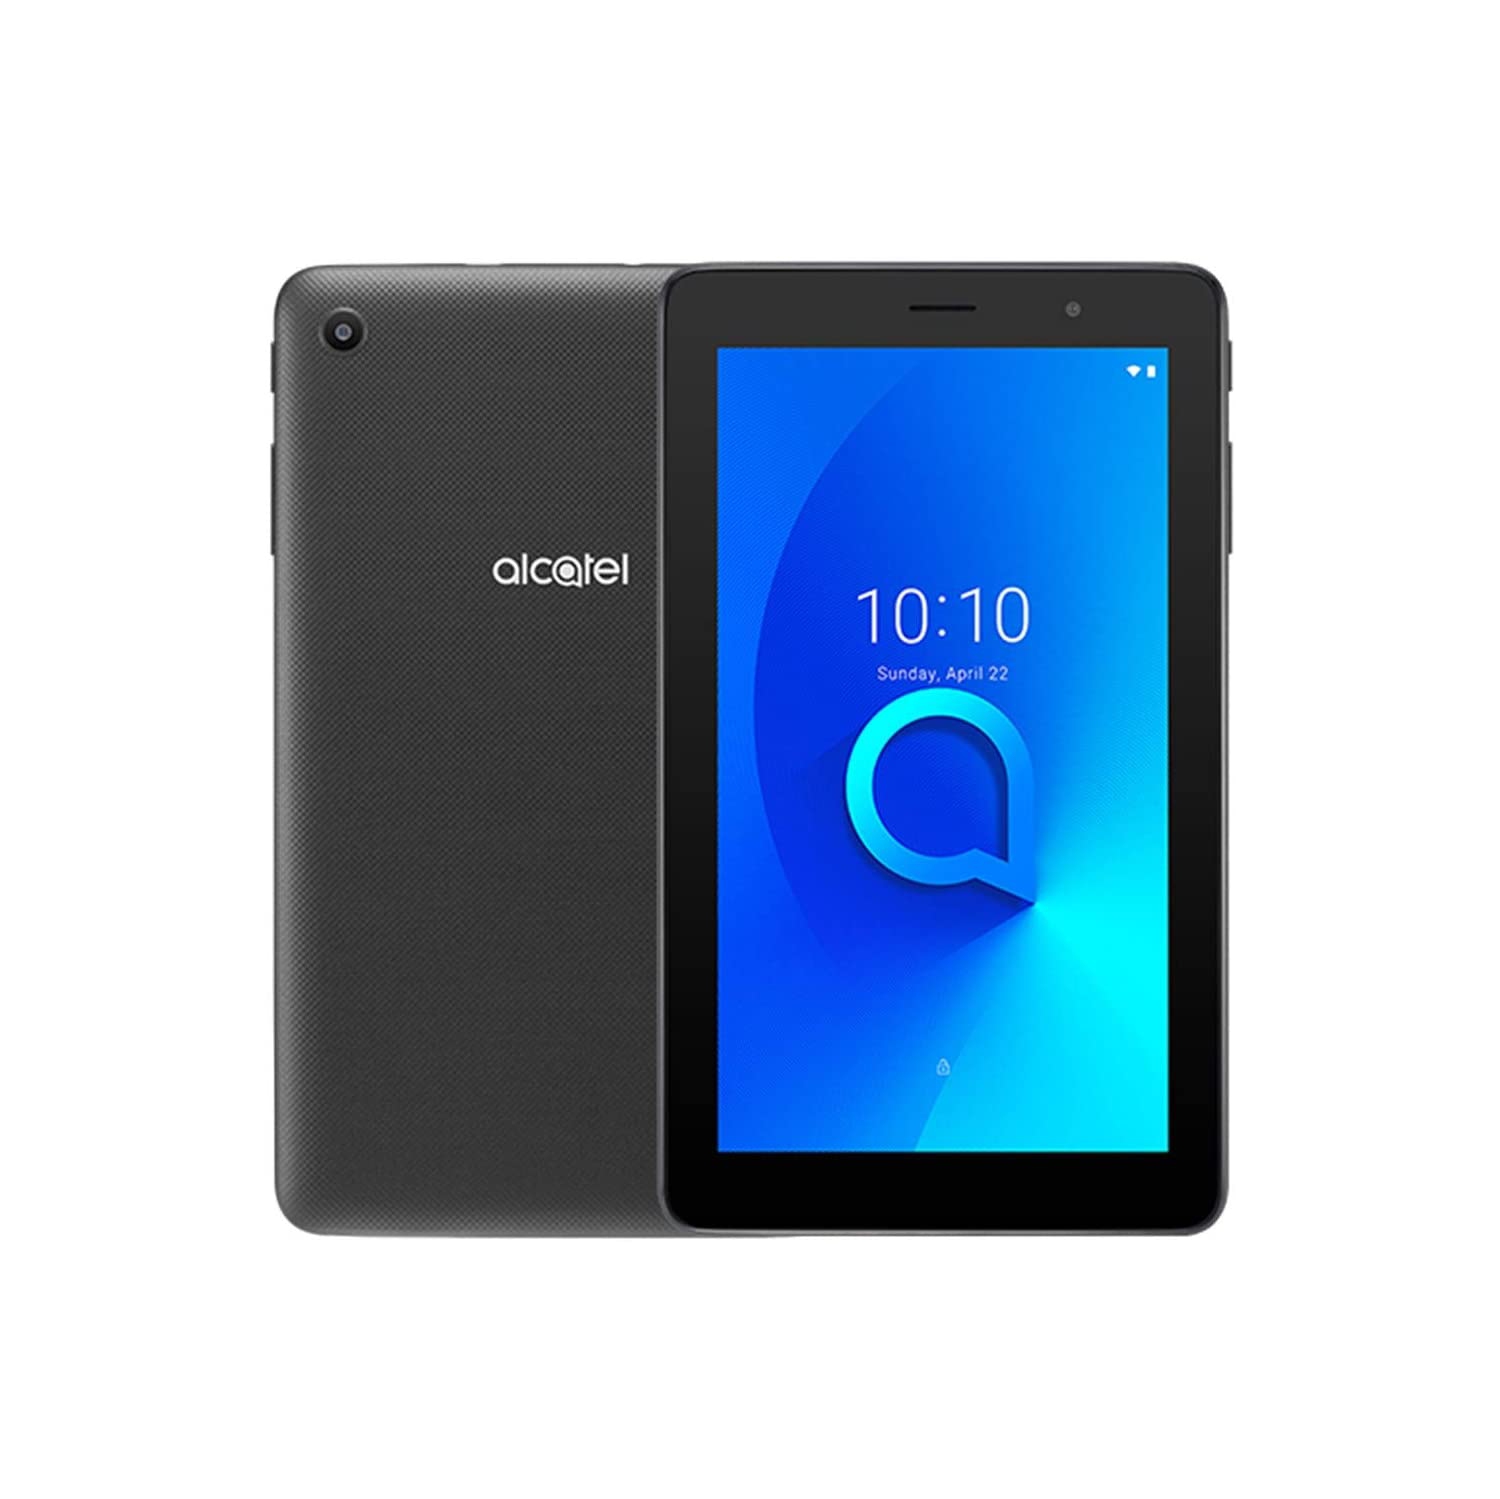 Alcatel 1T 7.0" 9013A (16GB) , (WiFi + Cellular) 4G Unlocked Android Tablet - Black - Open Box